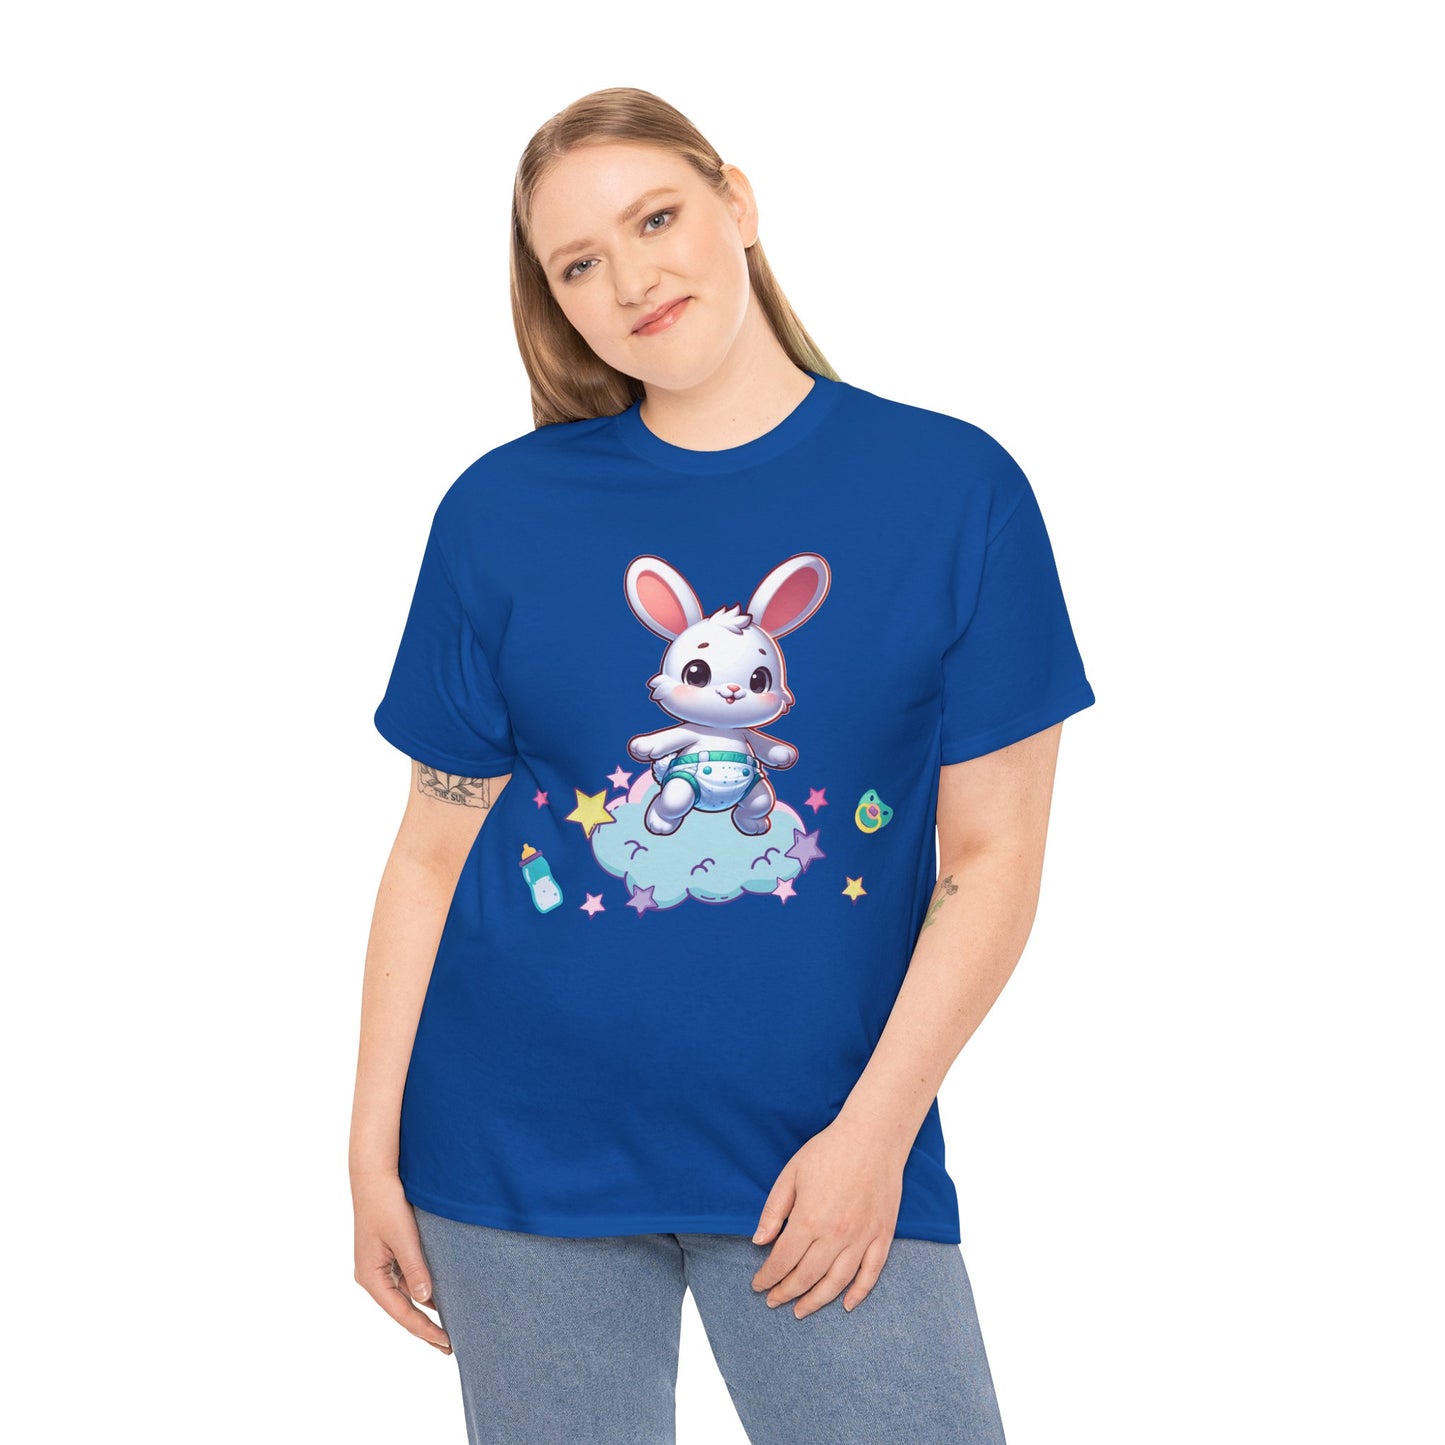 Baby Bunny Unisex T-Shirt - Adult Baby Diaper Lover - Furry Friend Tee